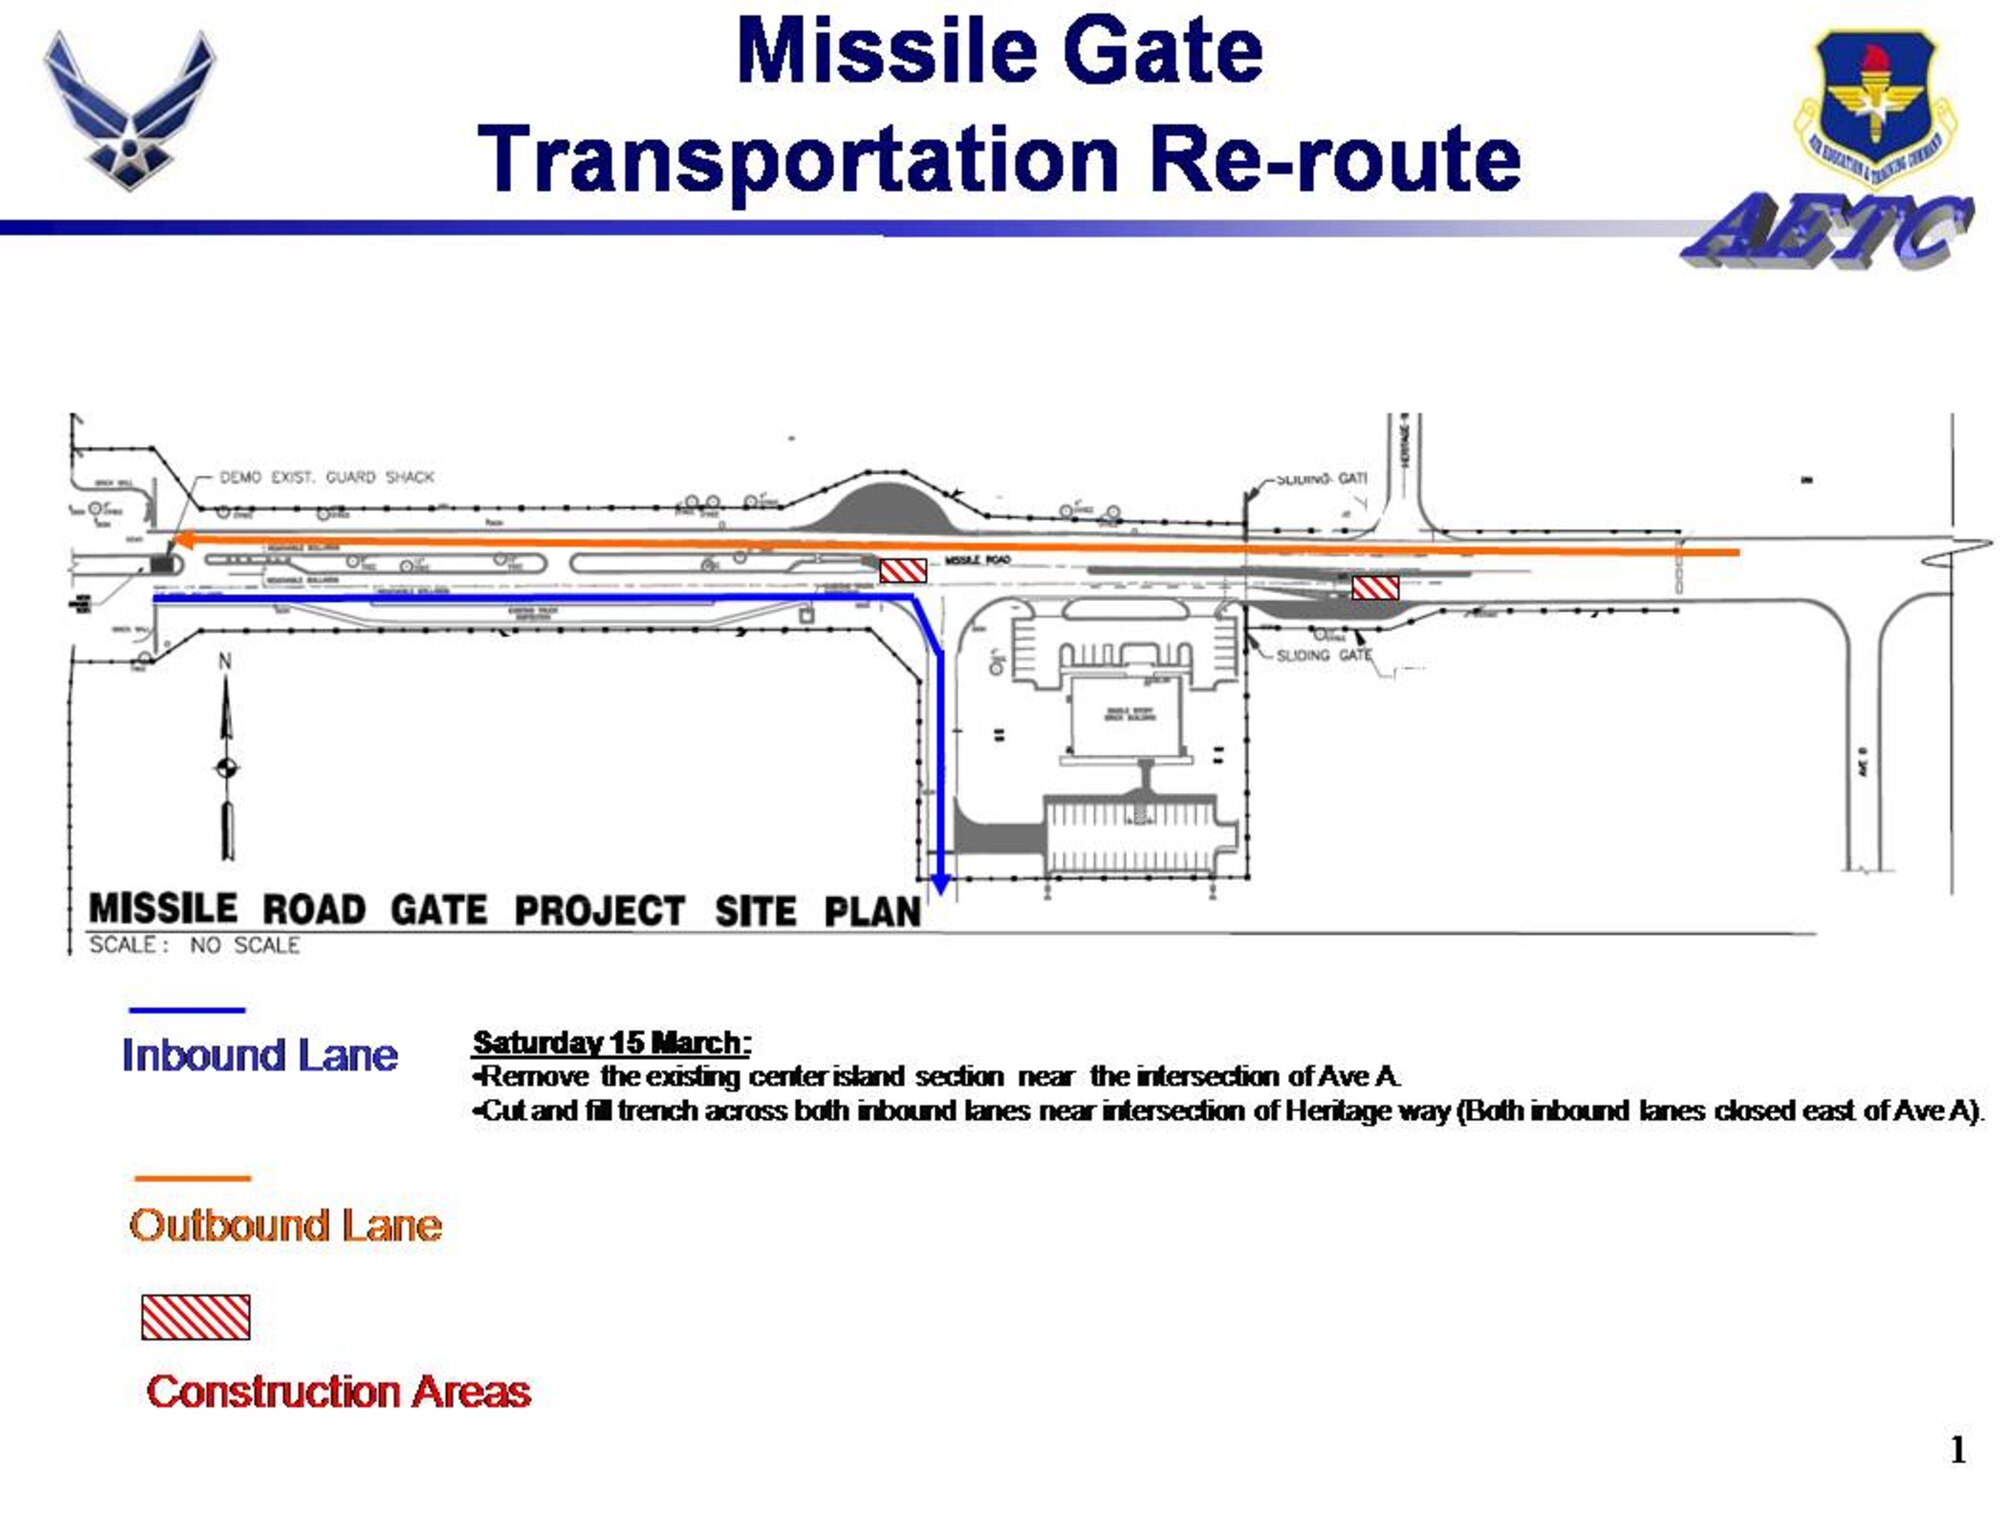 Construction crews will close down portions of Missile Road March 15 as part of the $450,000 project to relocate the visitor's center. Missile Road between Avenues A and B will be closed due to construction. Motorists entering the base through the Missile Road gate will detour onto Avenue A to Ninth Street. (U.S. Air Force graphic)